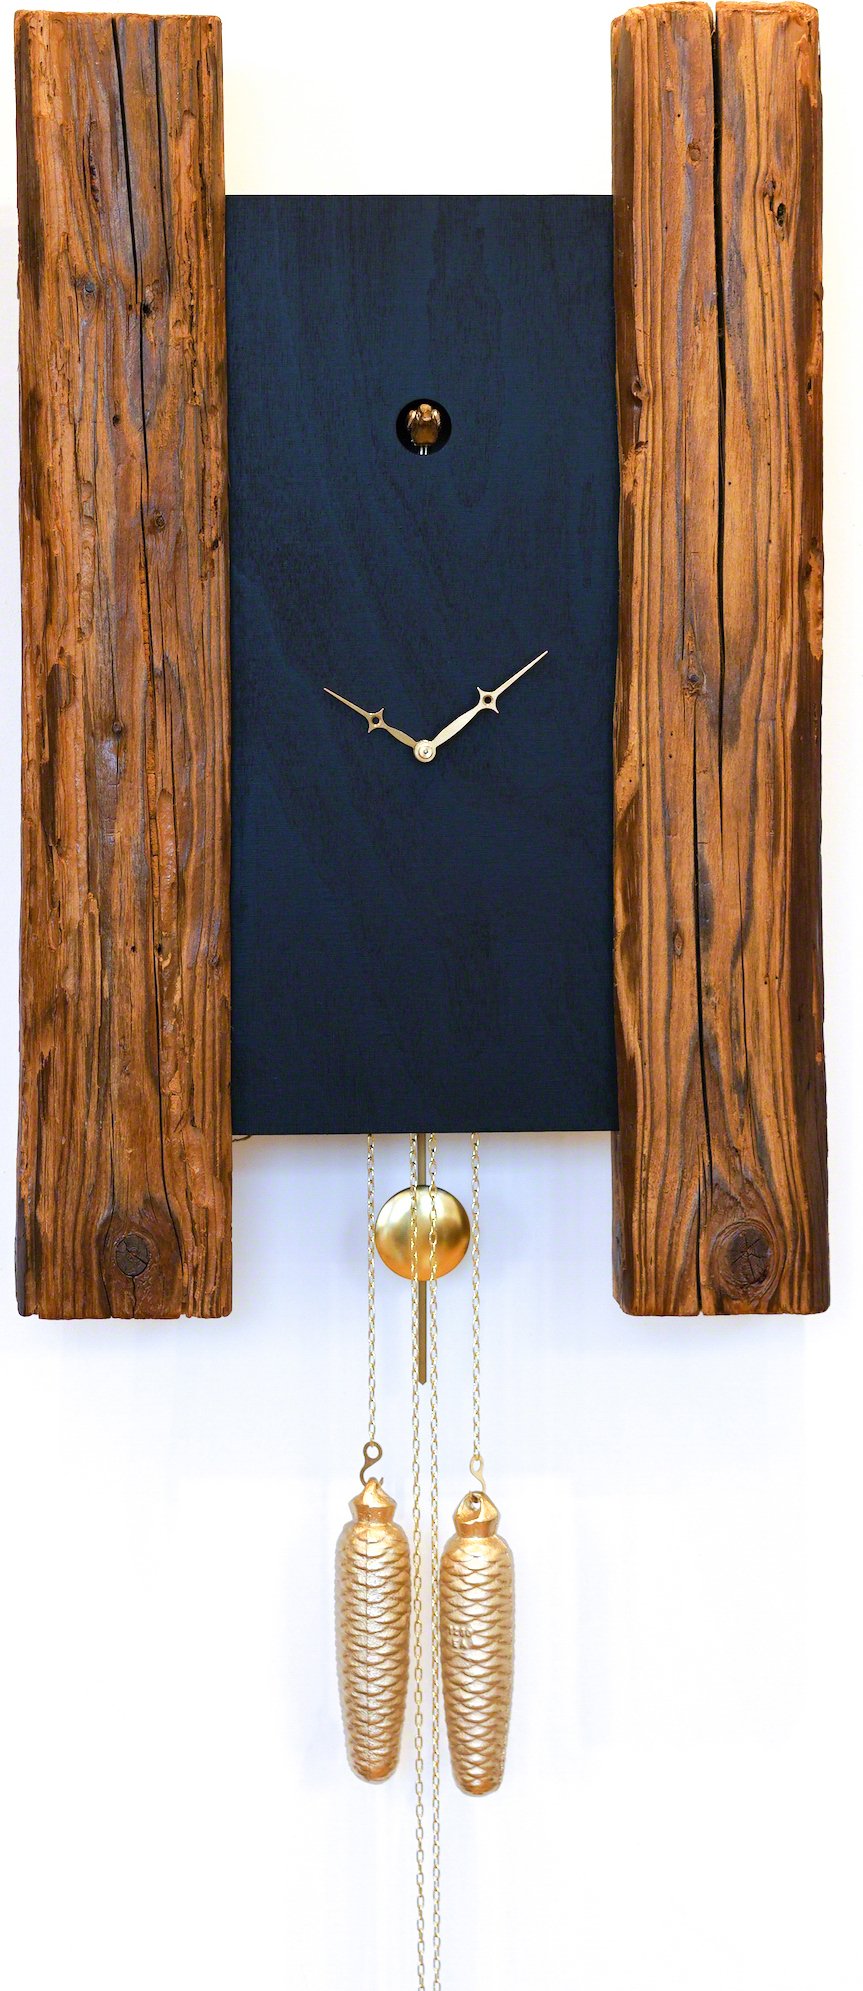 Cuckoo Clock 8-day-movement Modern-Art-Style 70cm by Rombach & Haas